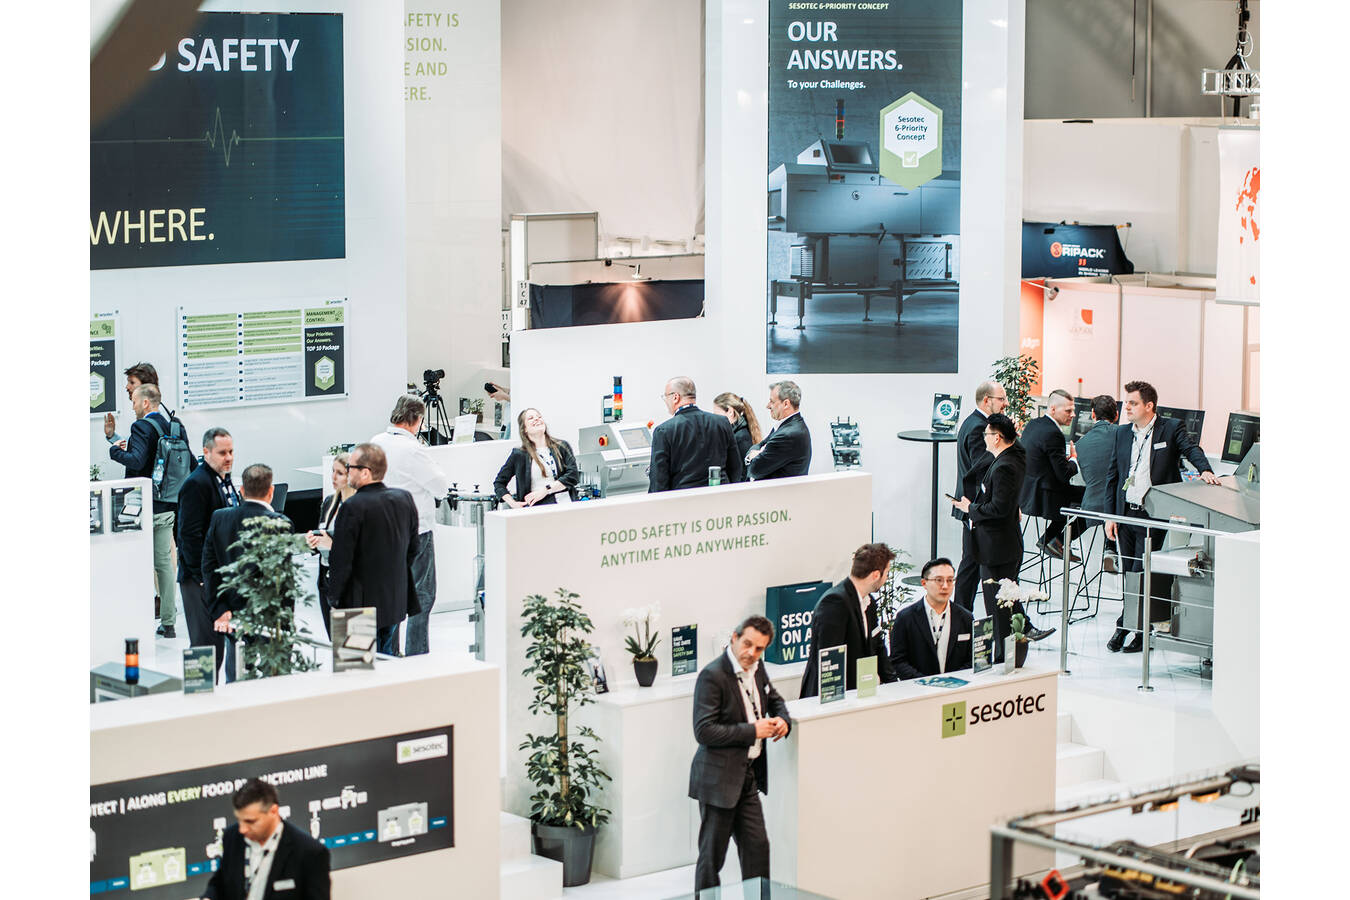 The interpack trade fair 2023: A complete success for Sesotec Motto ”Food Safety is our Passion. Anytime and Anywhere.” struck a chord with visitors. High demand for Sesotec’s innovations.